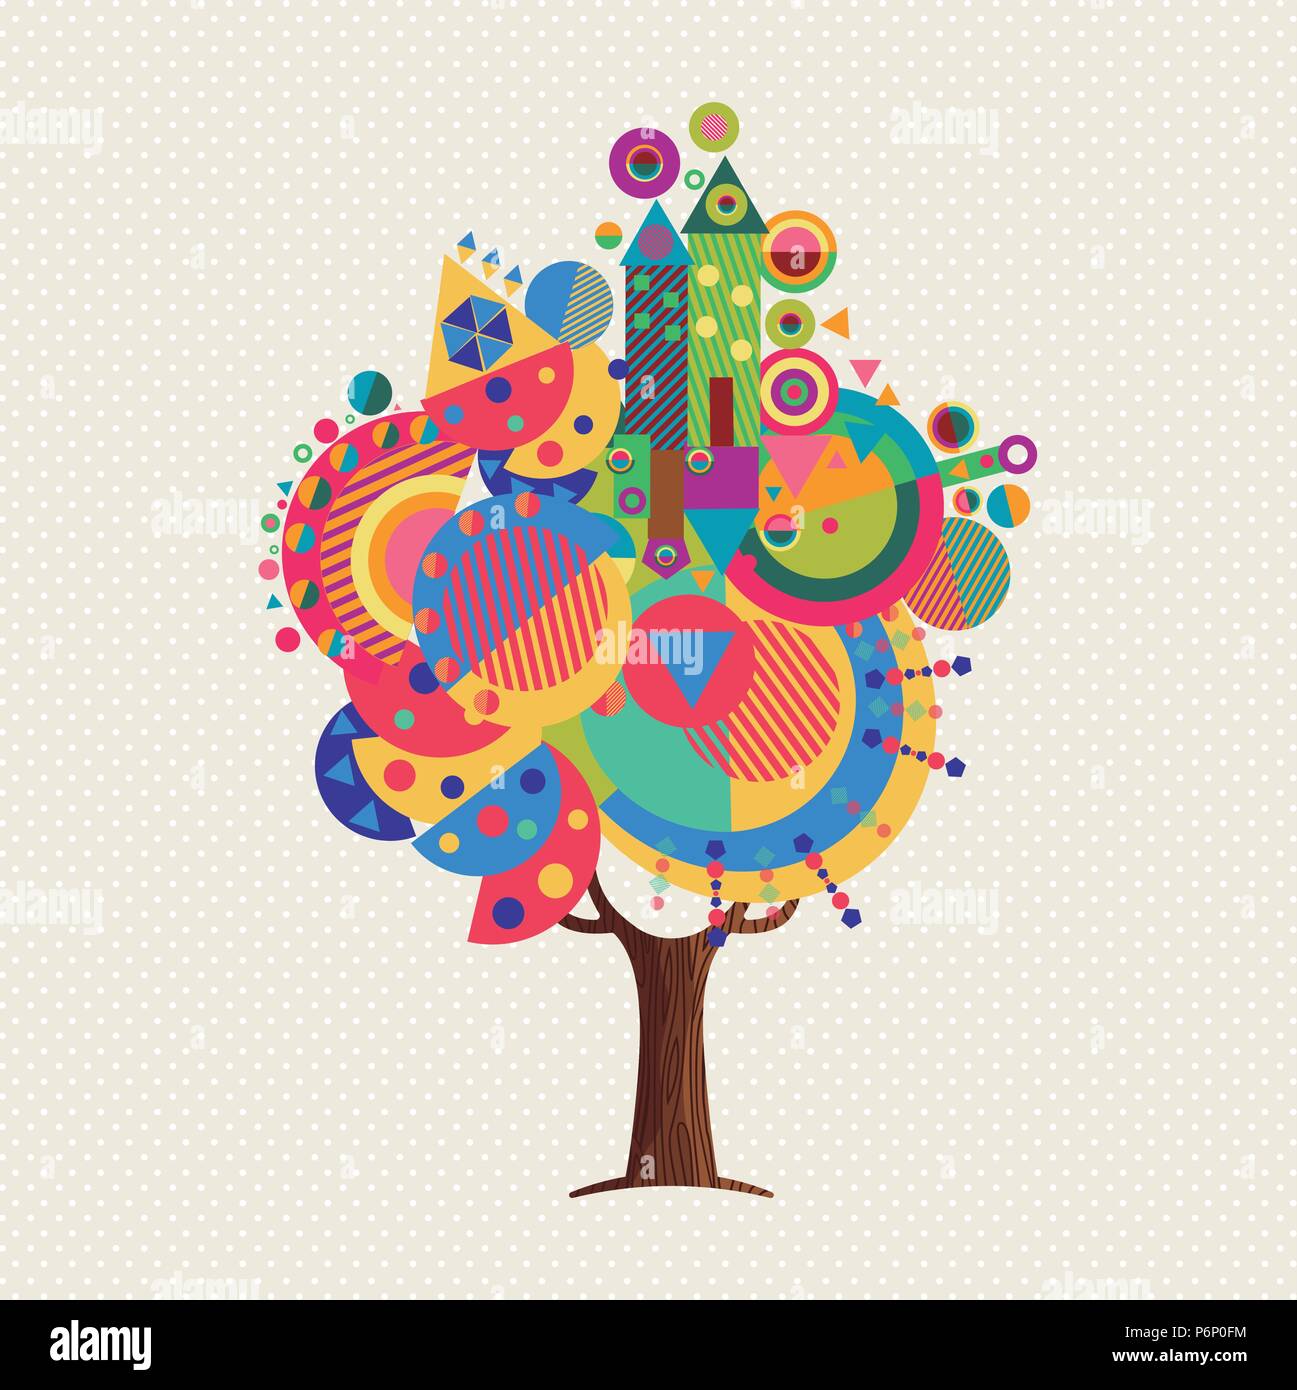 Tree made of colorful abstract shapes. Vibrant color geometric icons and symbols for fun conceptual idea. EPS10 vector. Stock Vector